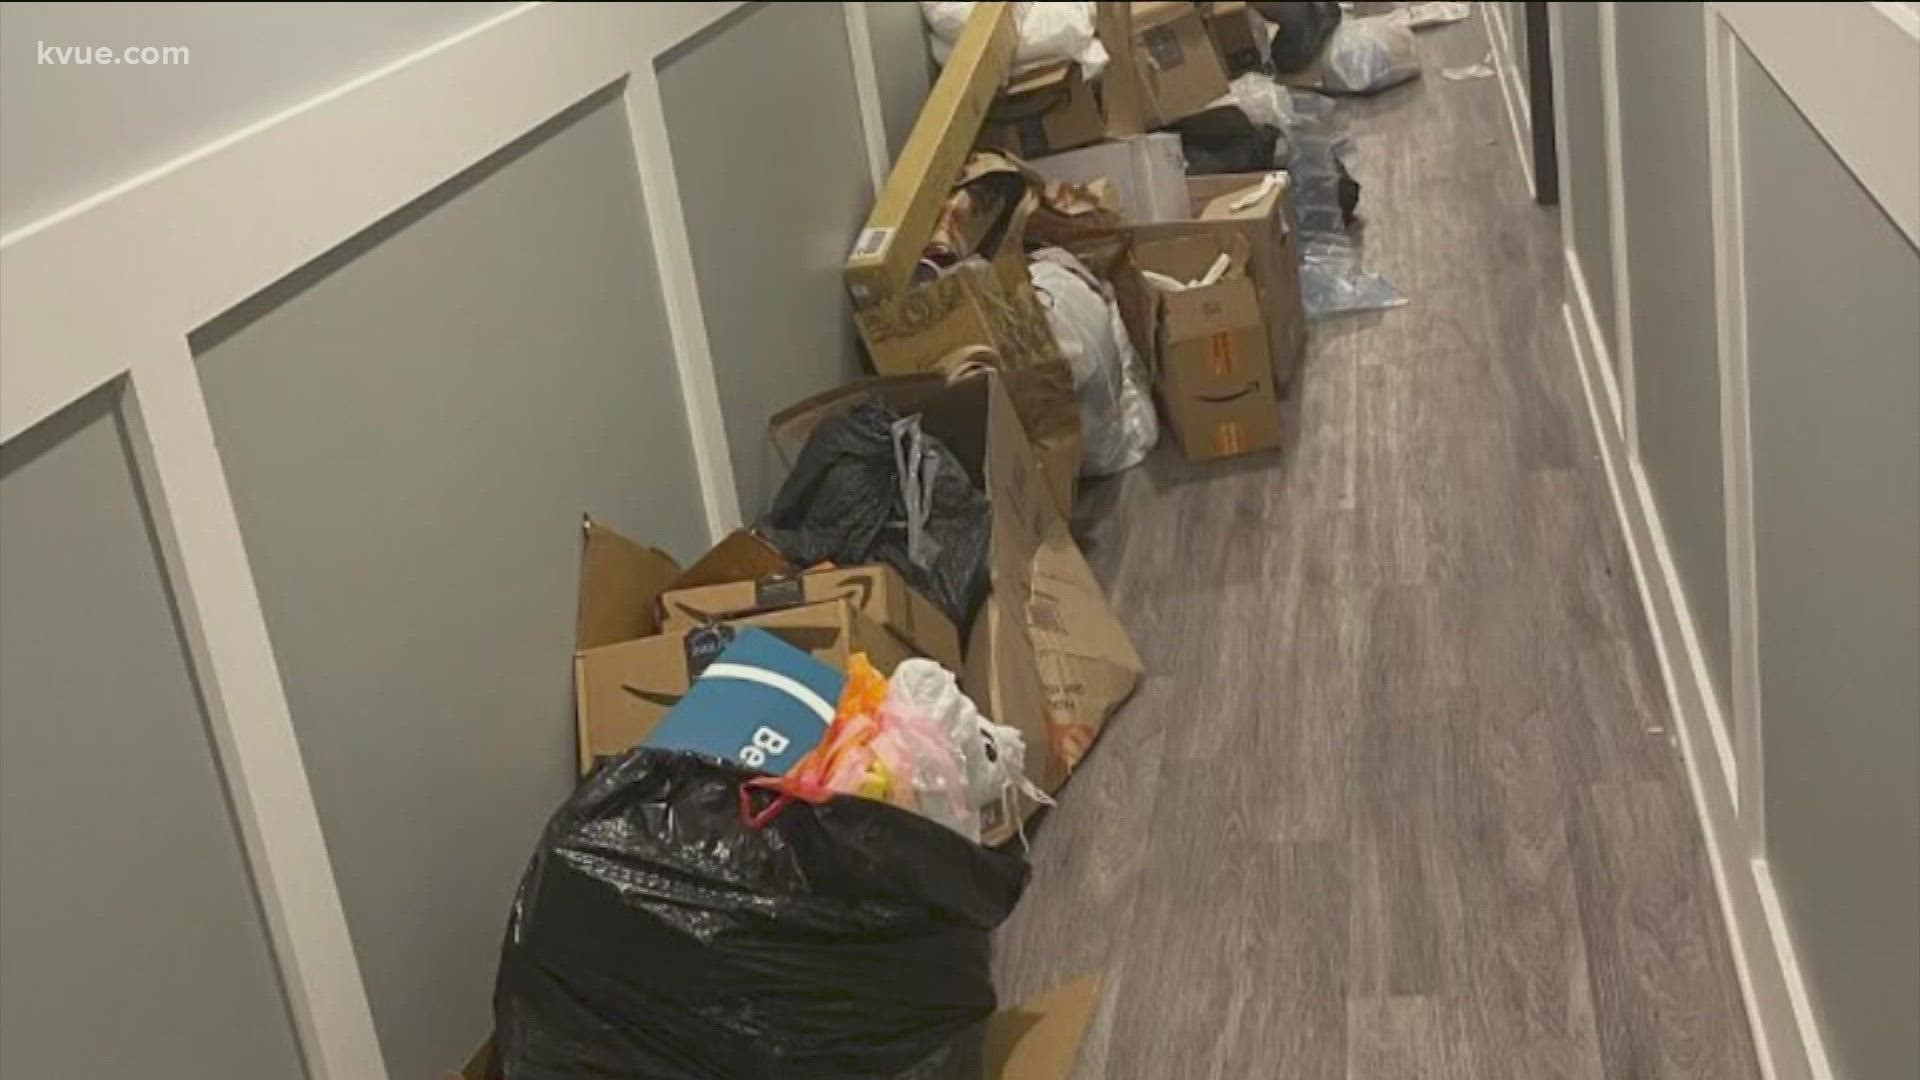 A move-in nightmare has some UT students saying their apartment's unfinished building is putting their safety and security at risk.